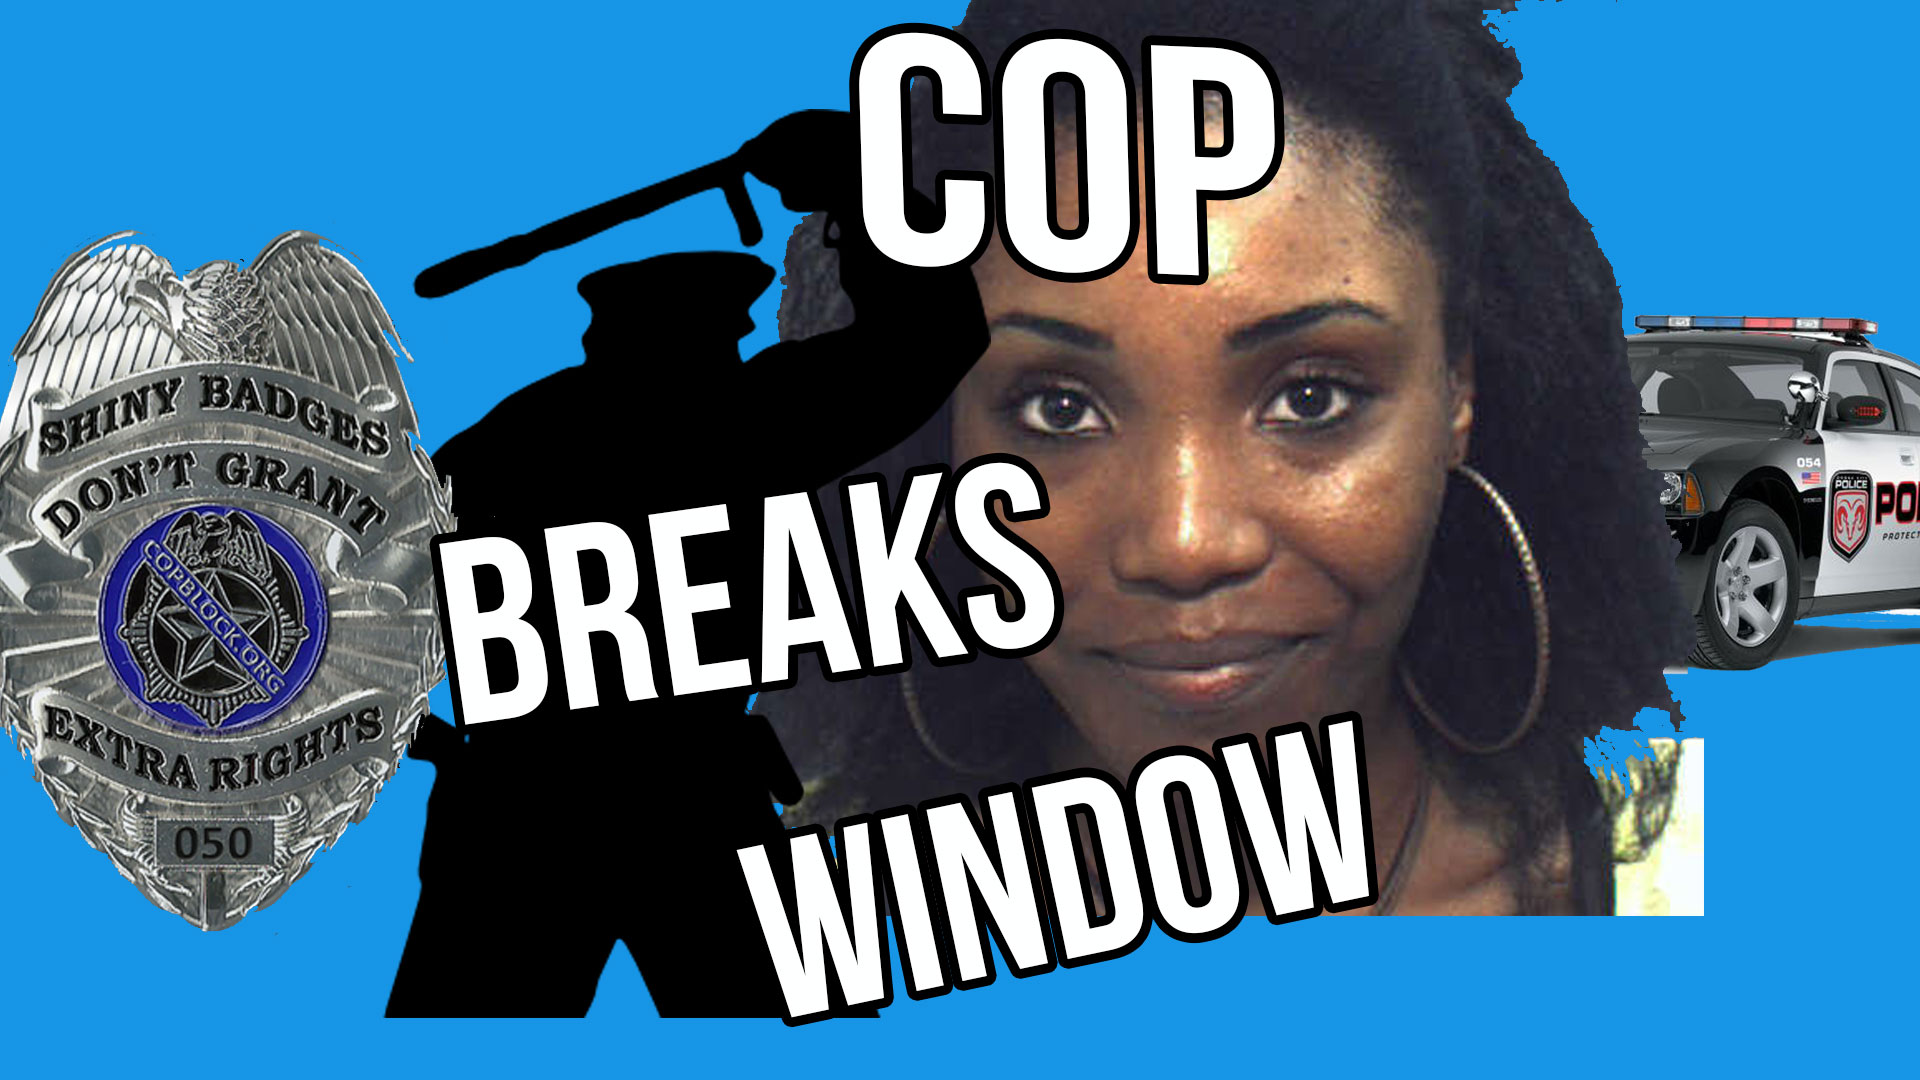 Cop Breaks Window, Drags Student from Car